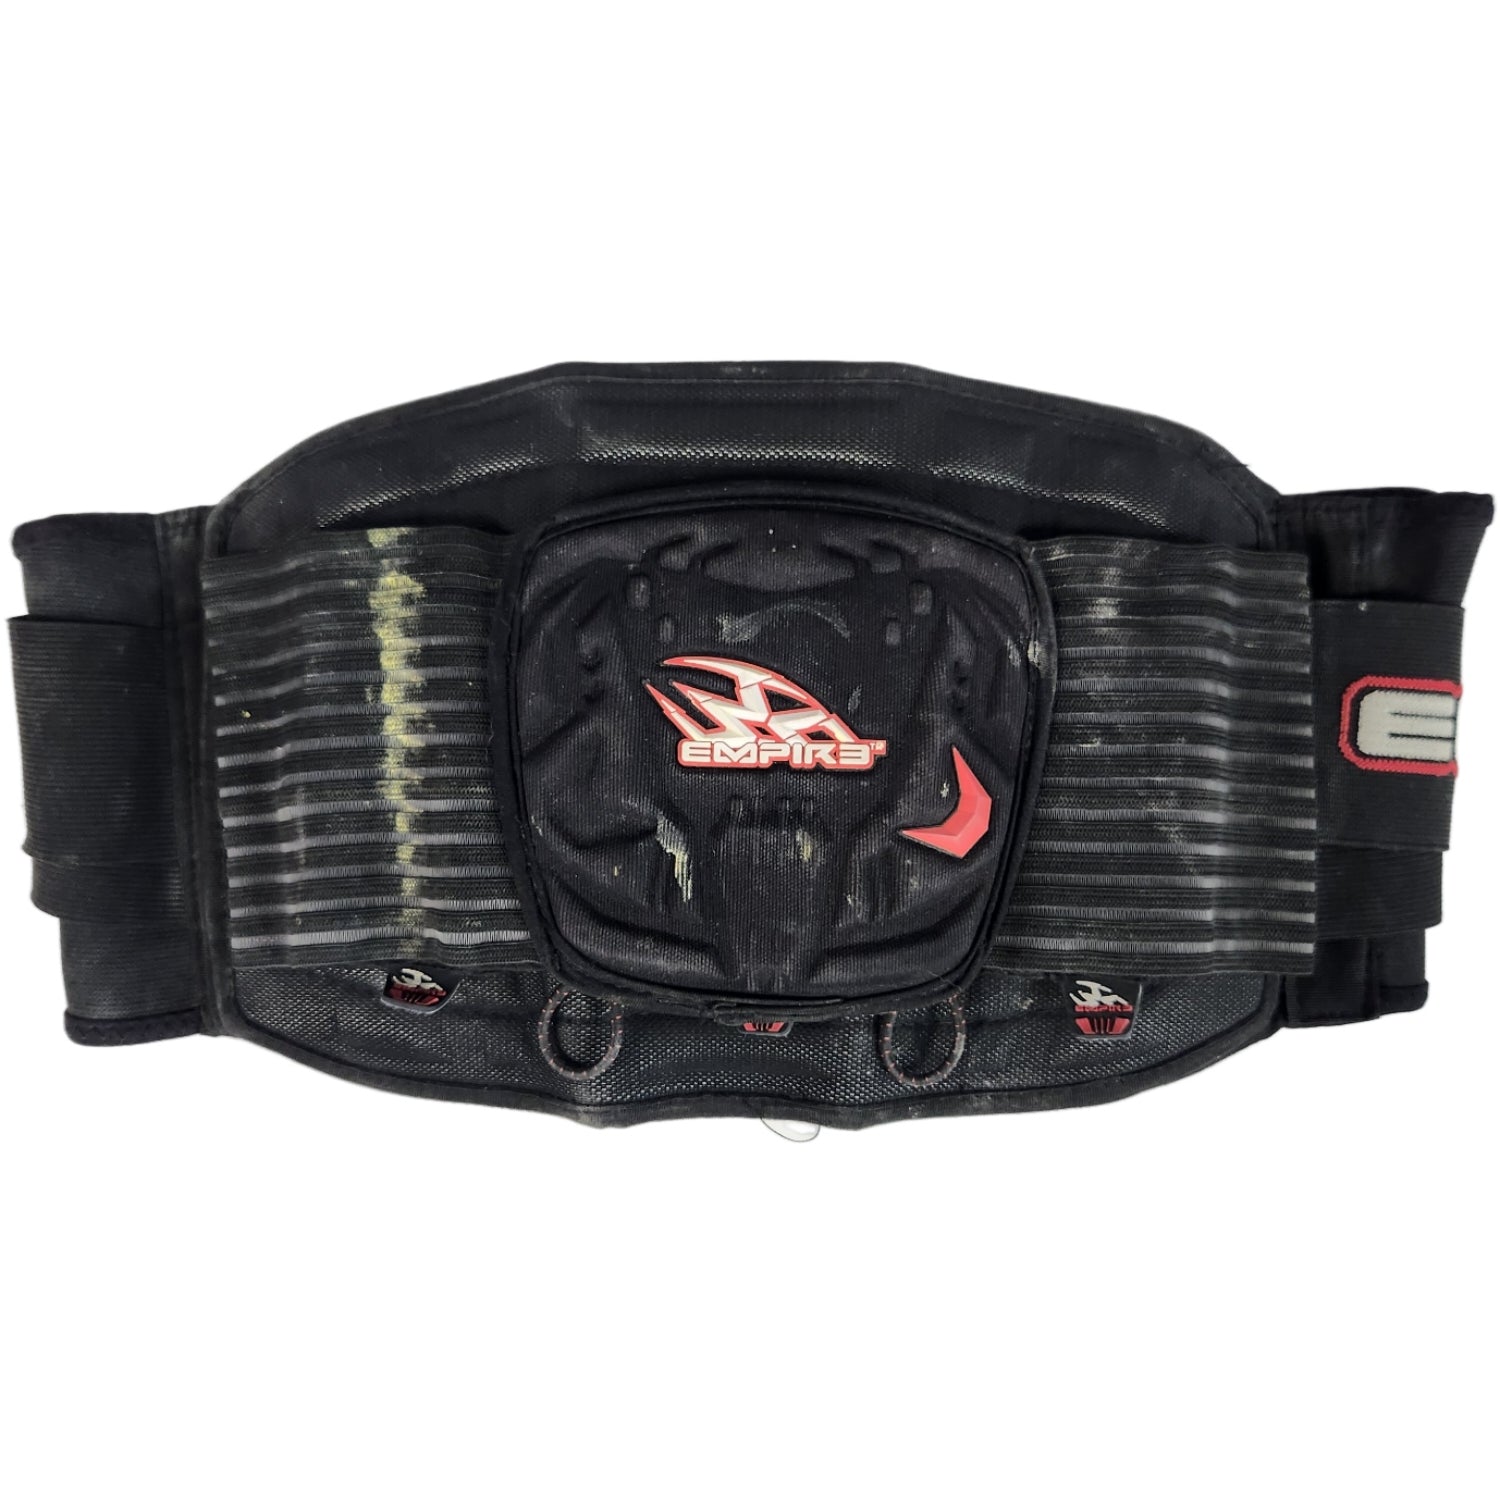 Empire Fast Pack 3+ - Black/Red